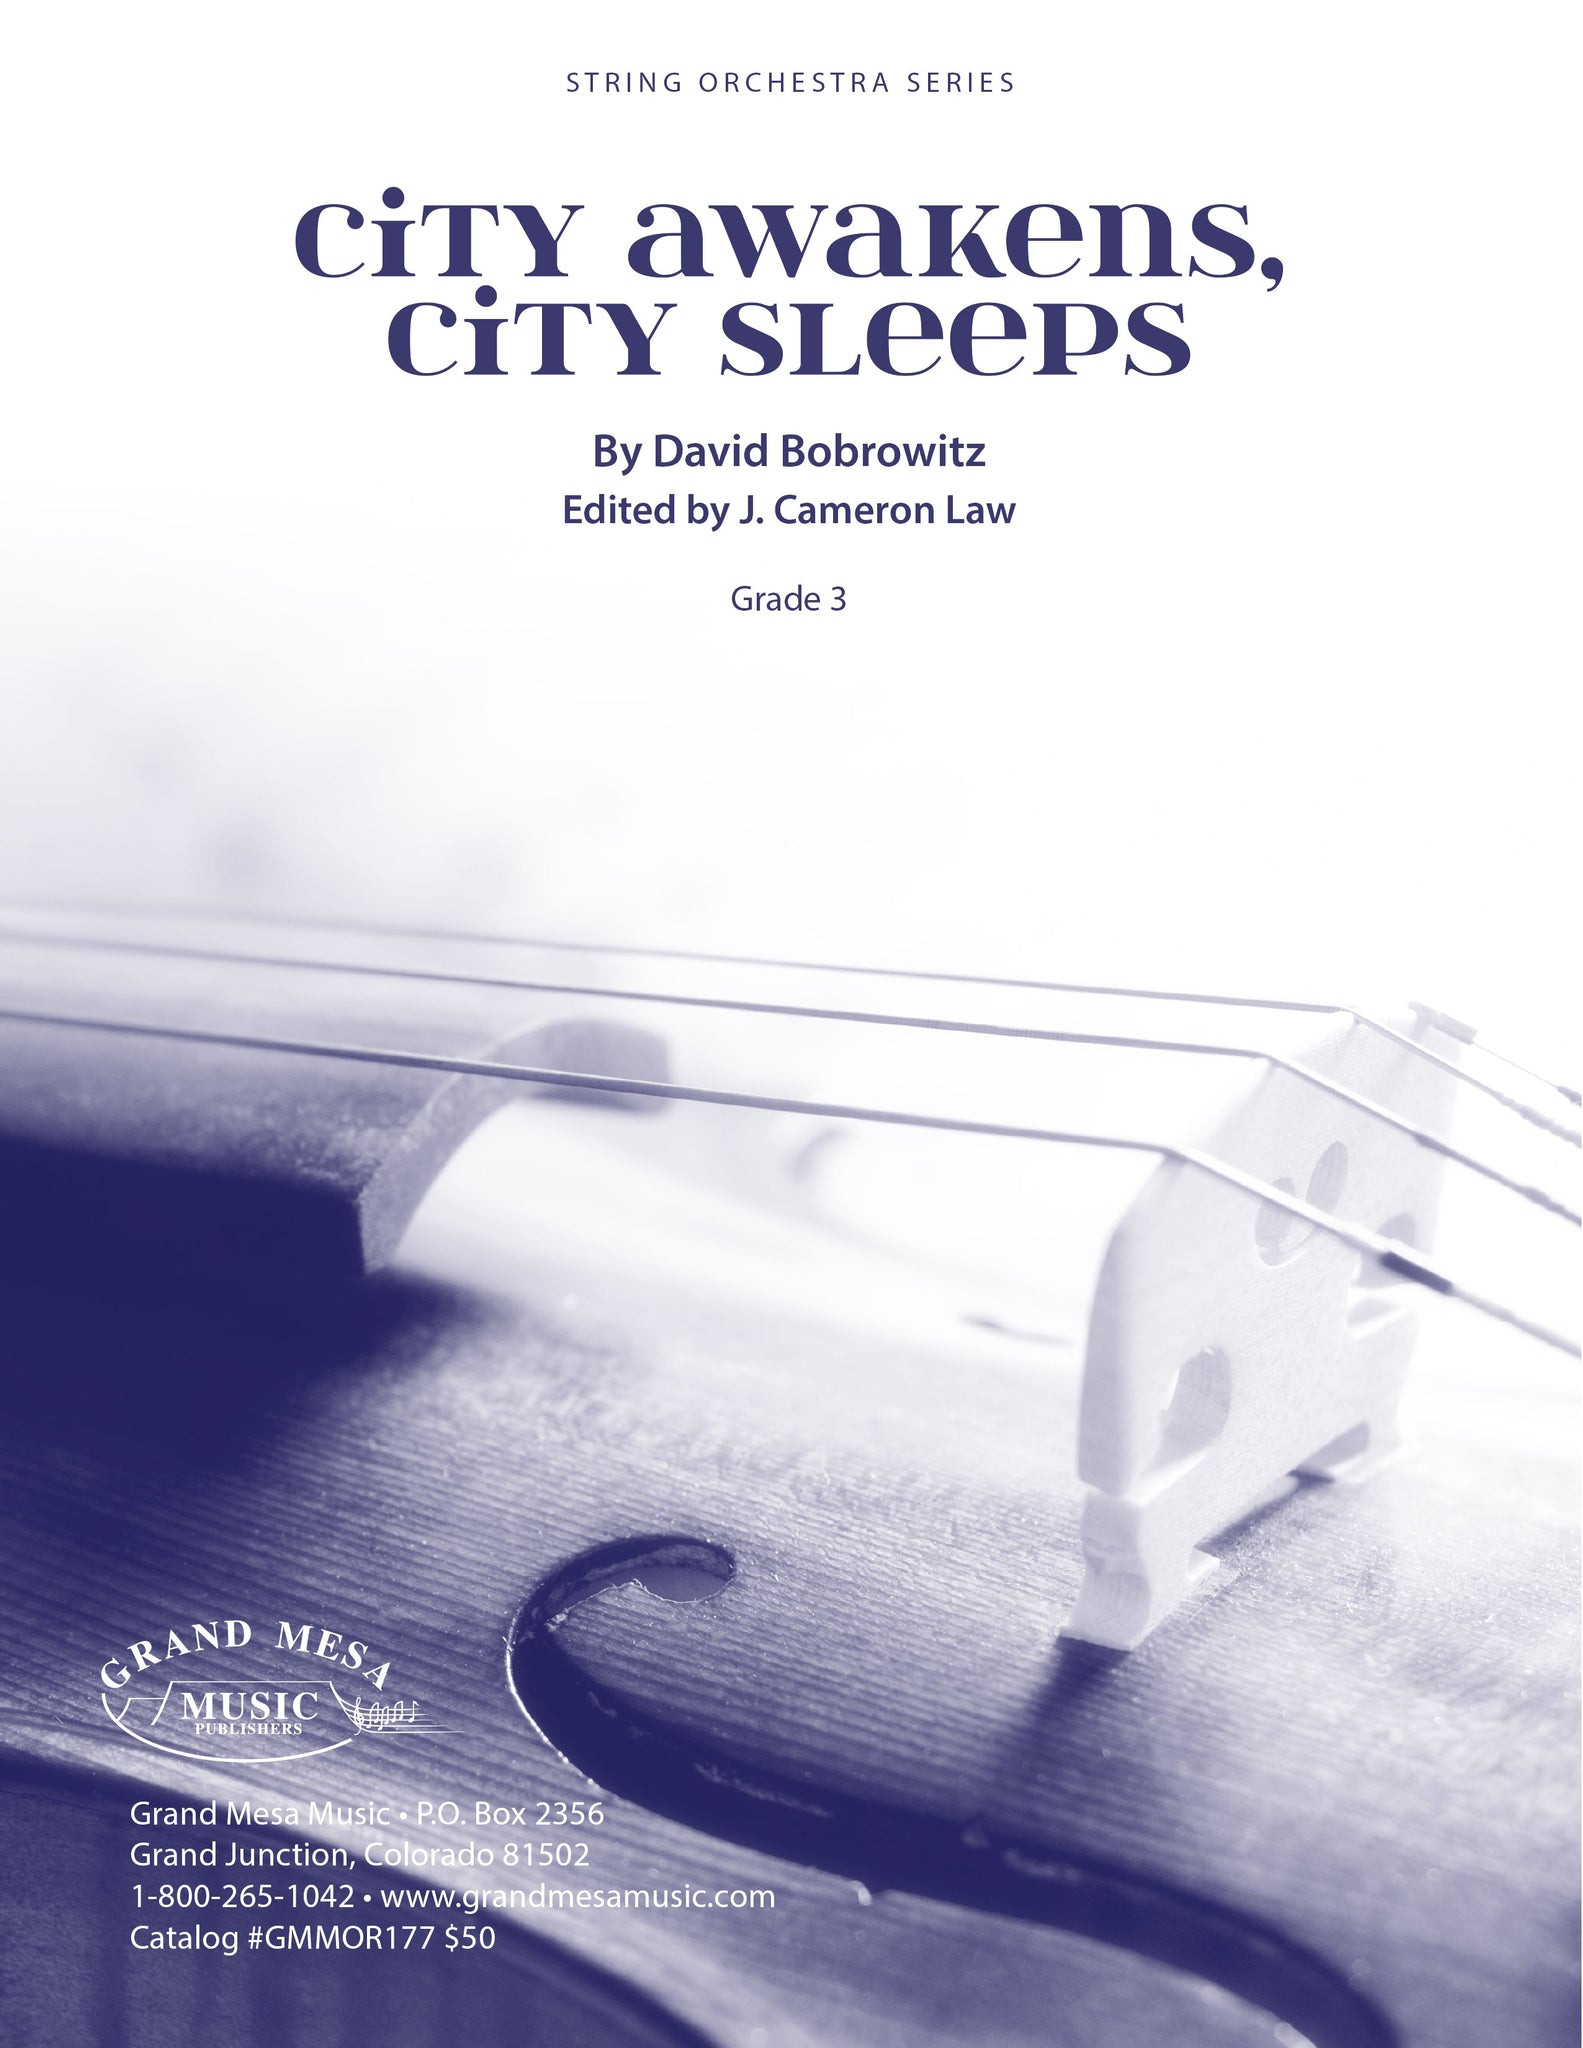 Strings sheet music cover of City Awakens, City Sleeps, composed by David Bobrowitz.